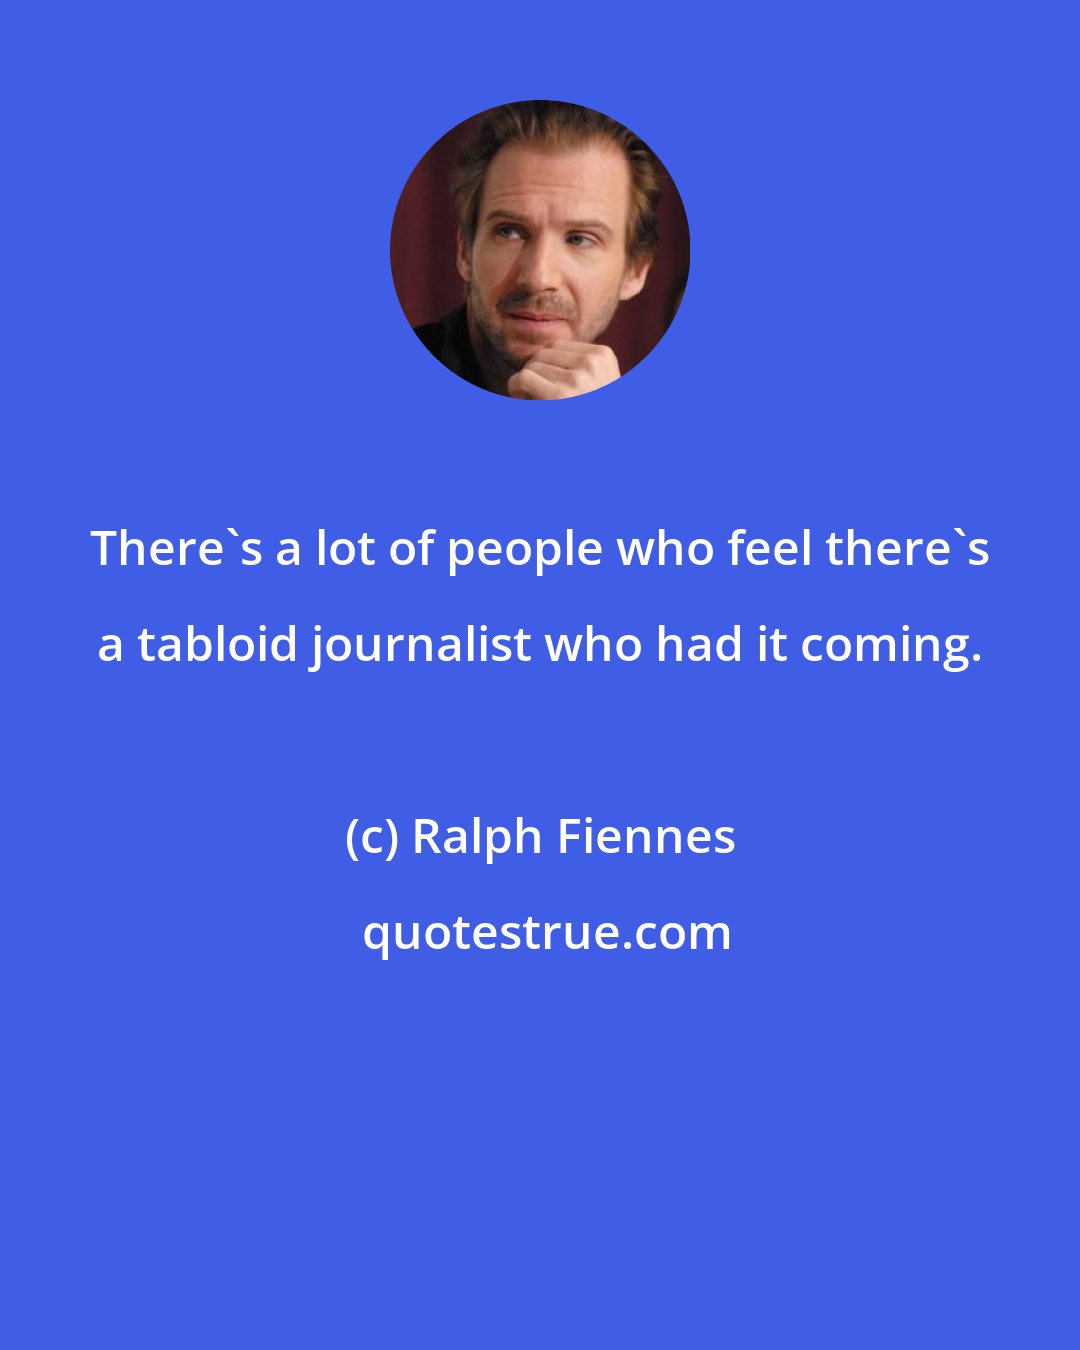 Ralph Fiennes: There's a lot of people who feel there's a tabloid journalist who had it coming.